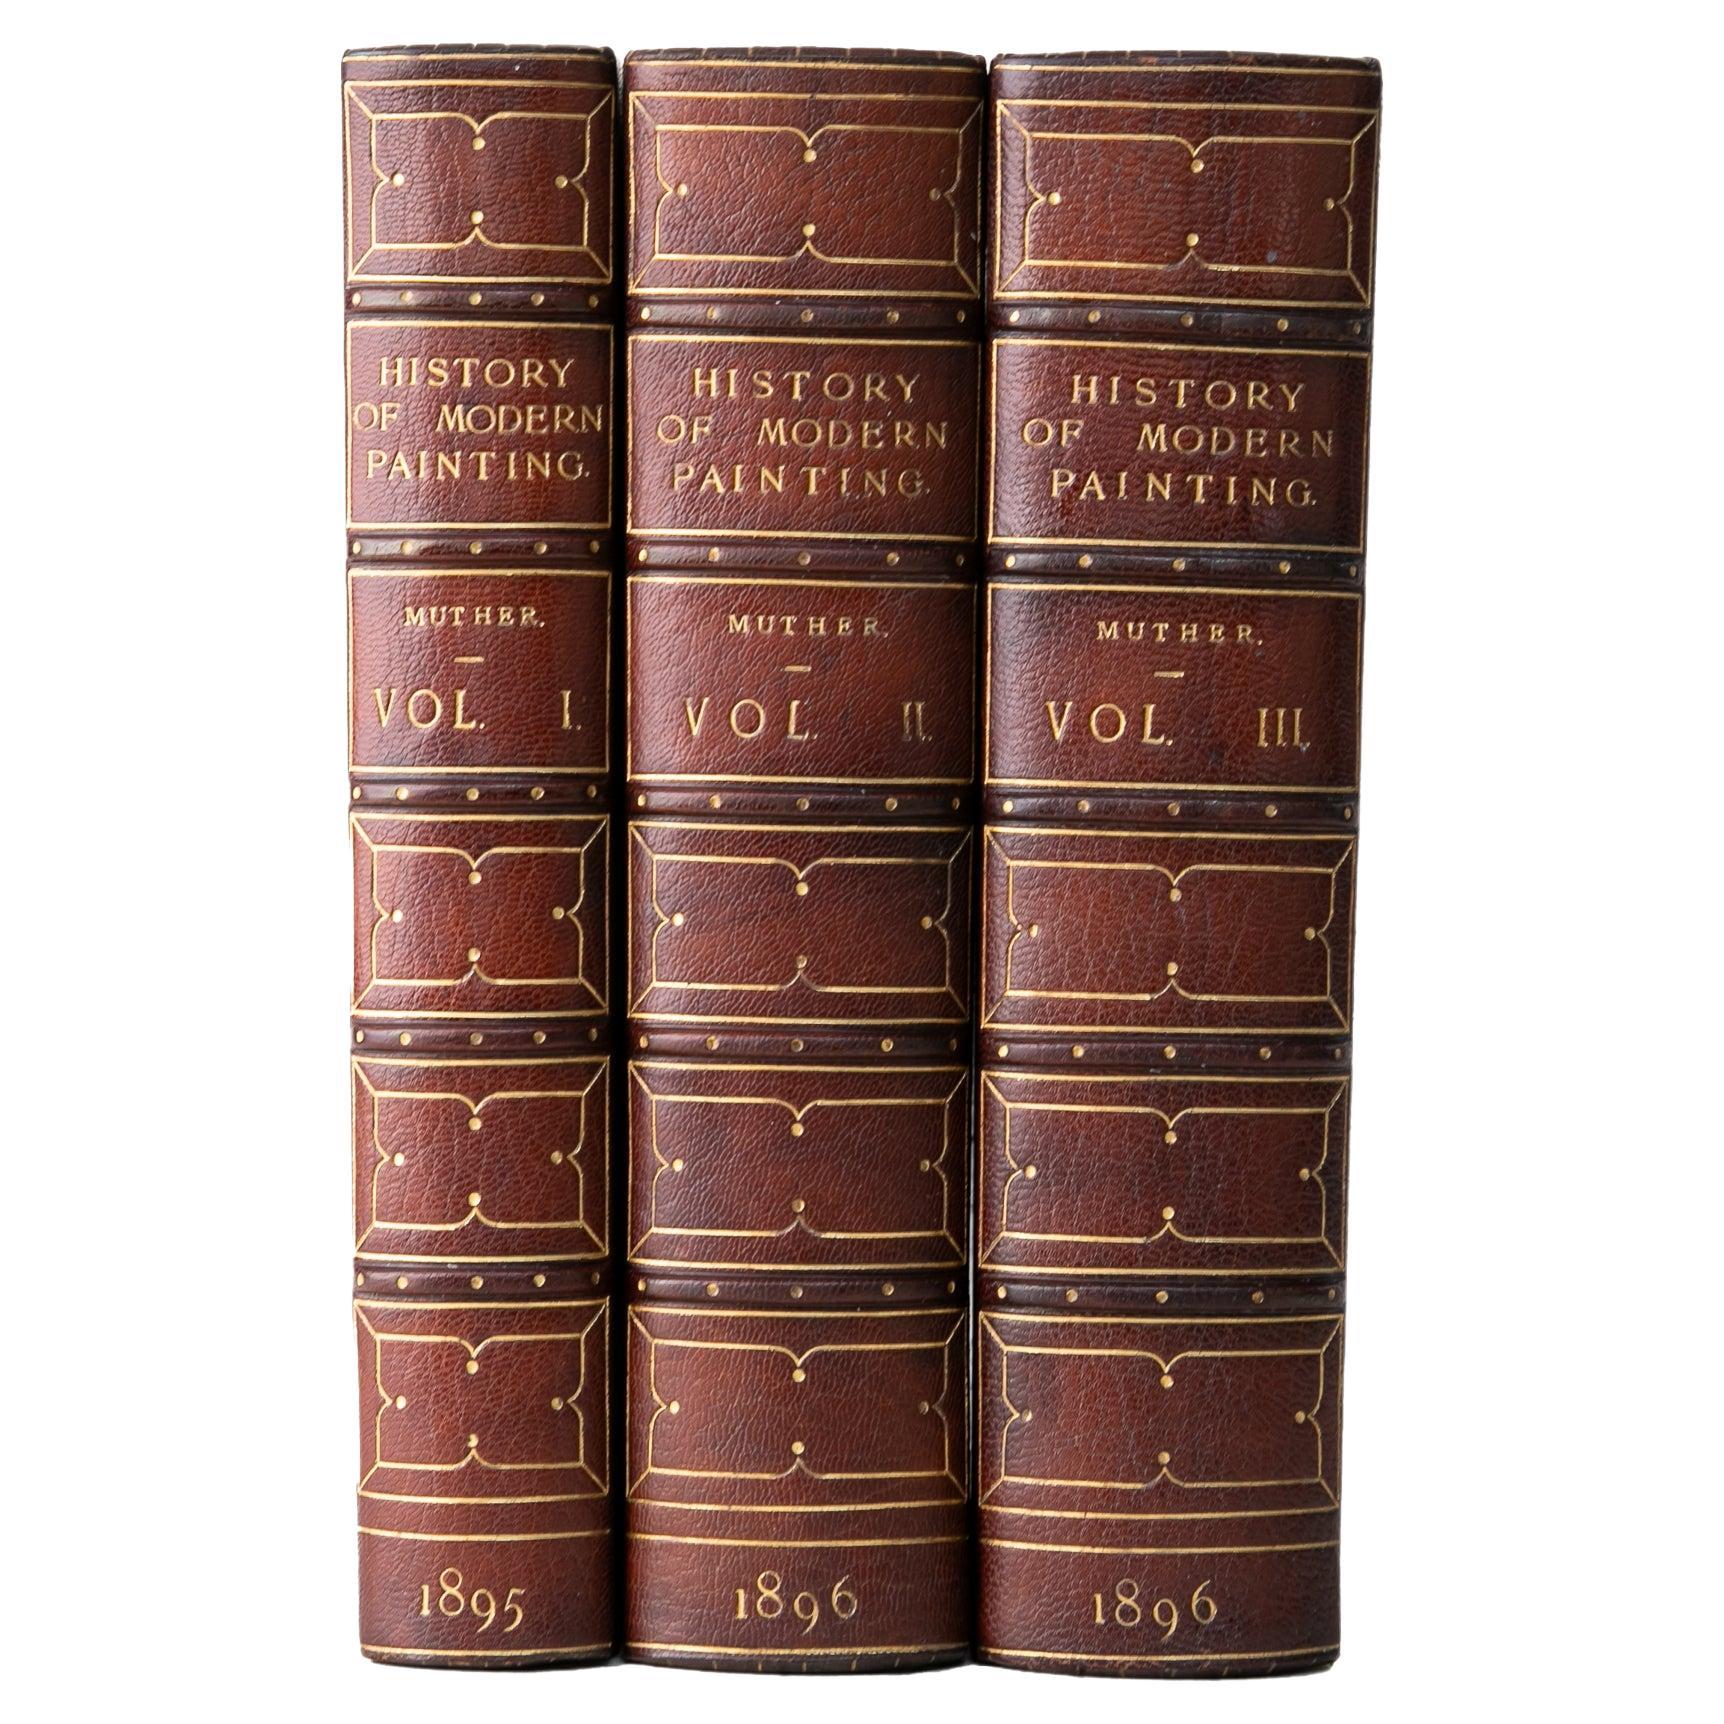 3 Volumes. Richard Muther, The History of Modern Painting. 